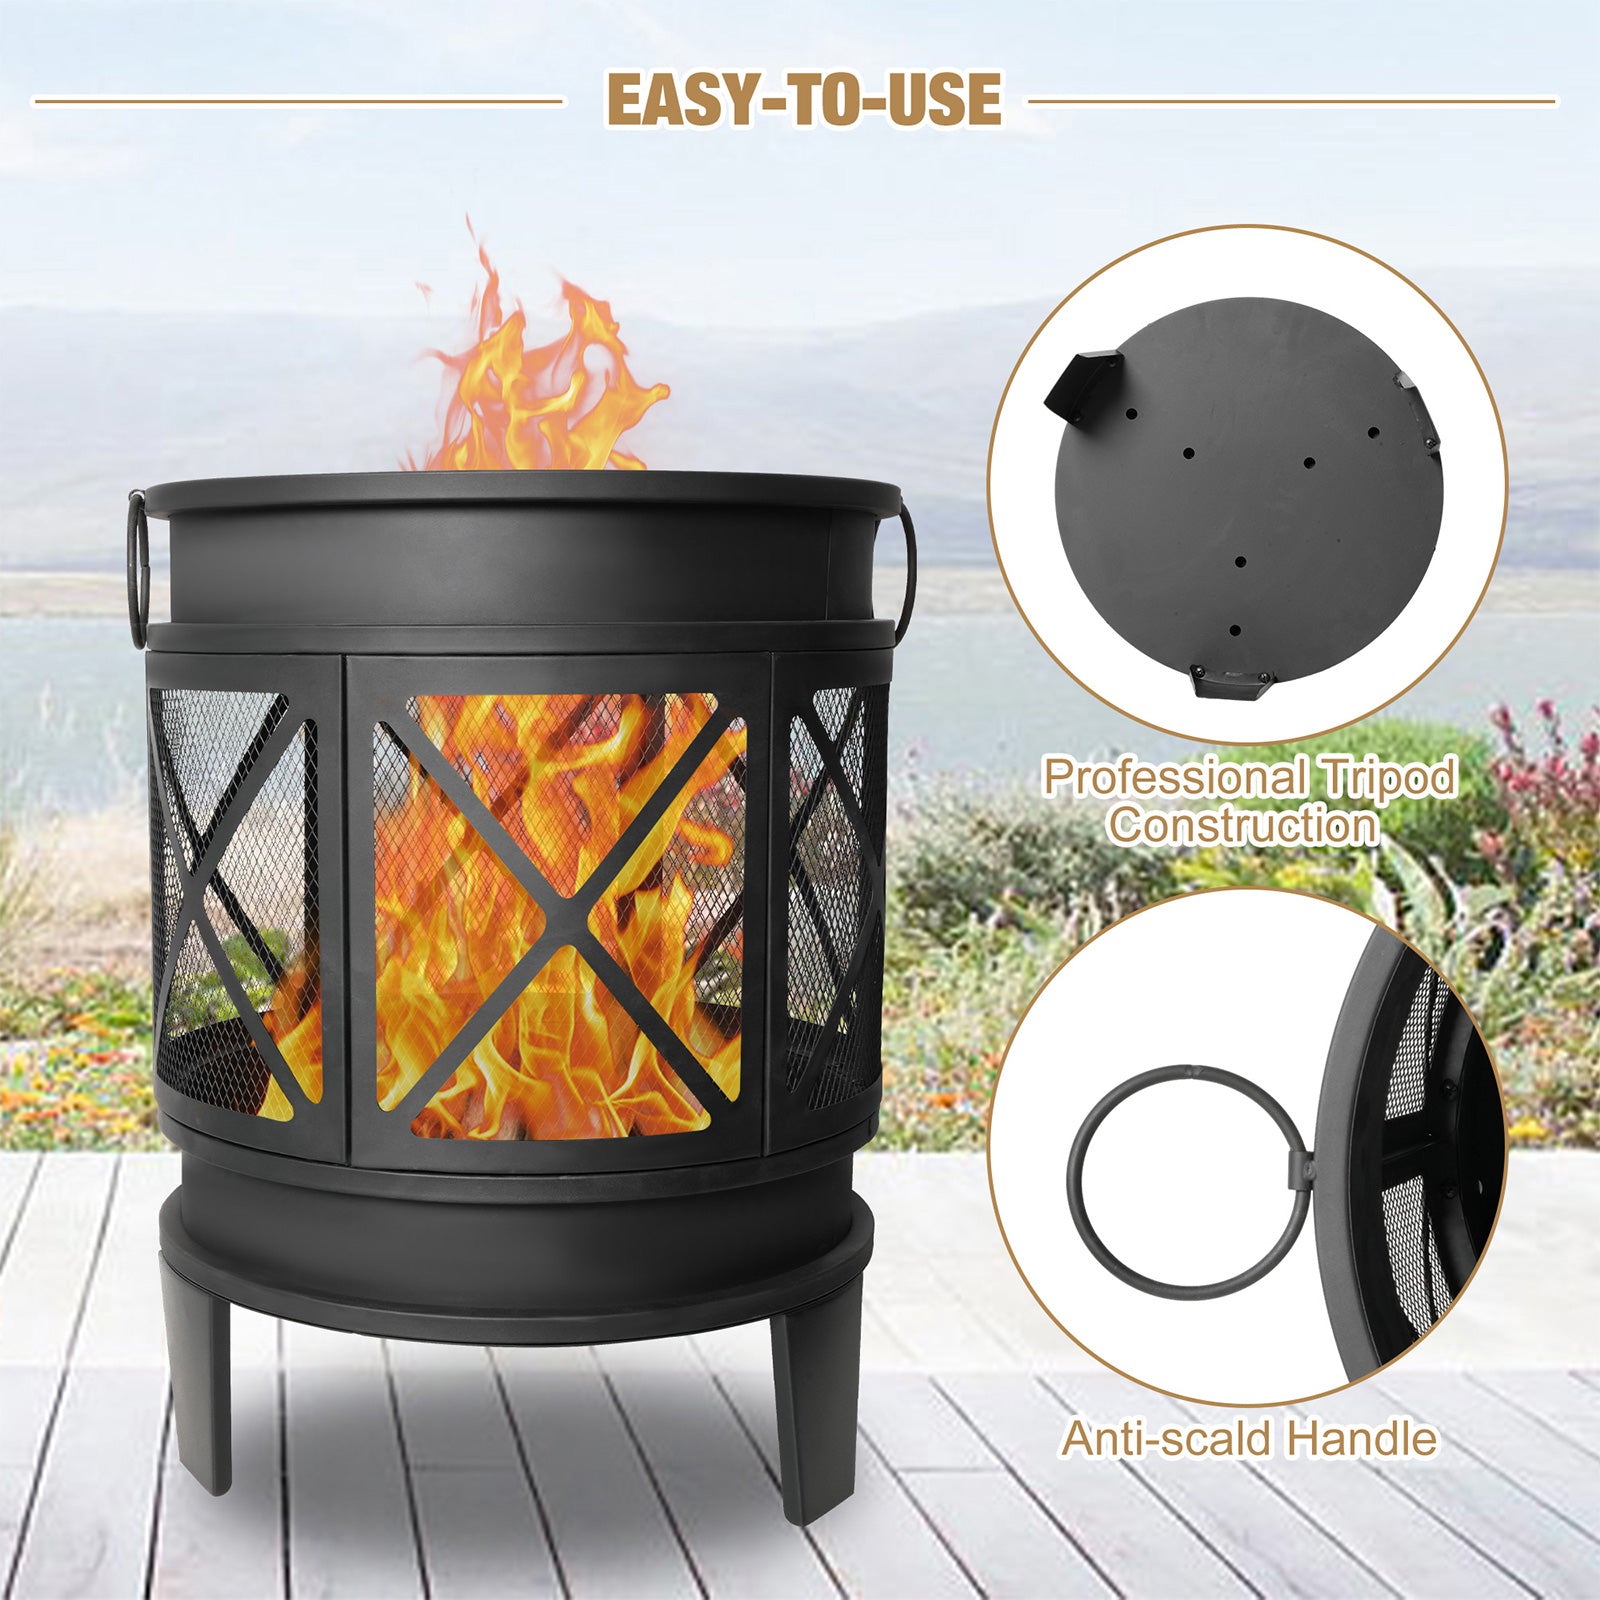 23.2" Barrel Outdoor Wood Burning Fire Pit Patio Fireplace with Spark Screen and Poker